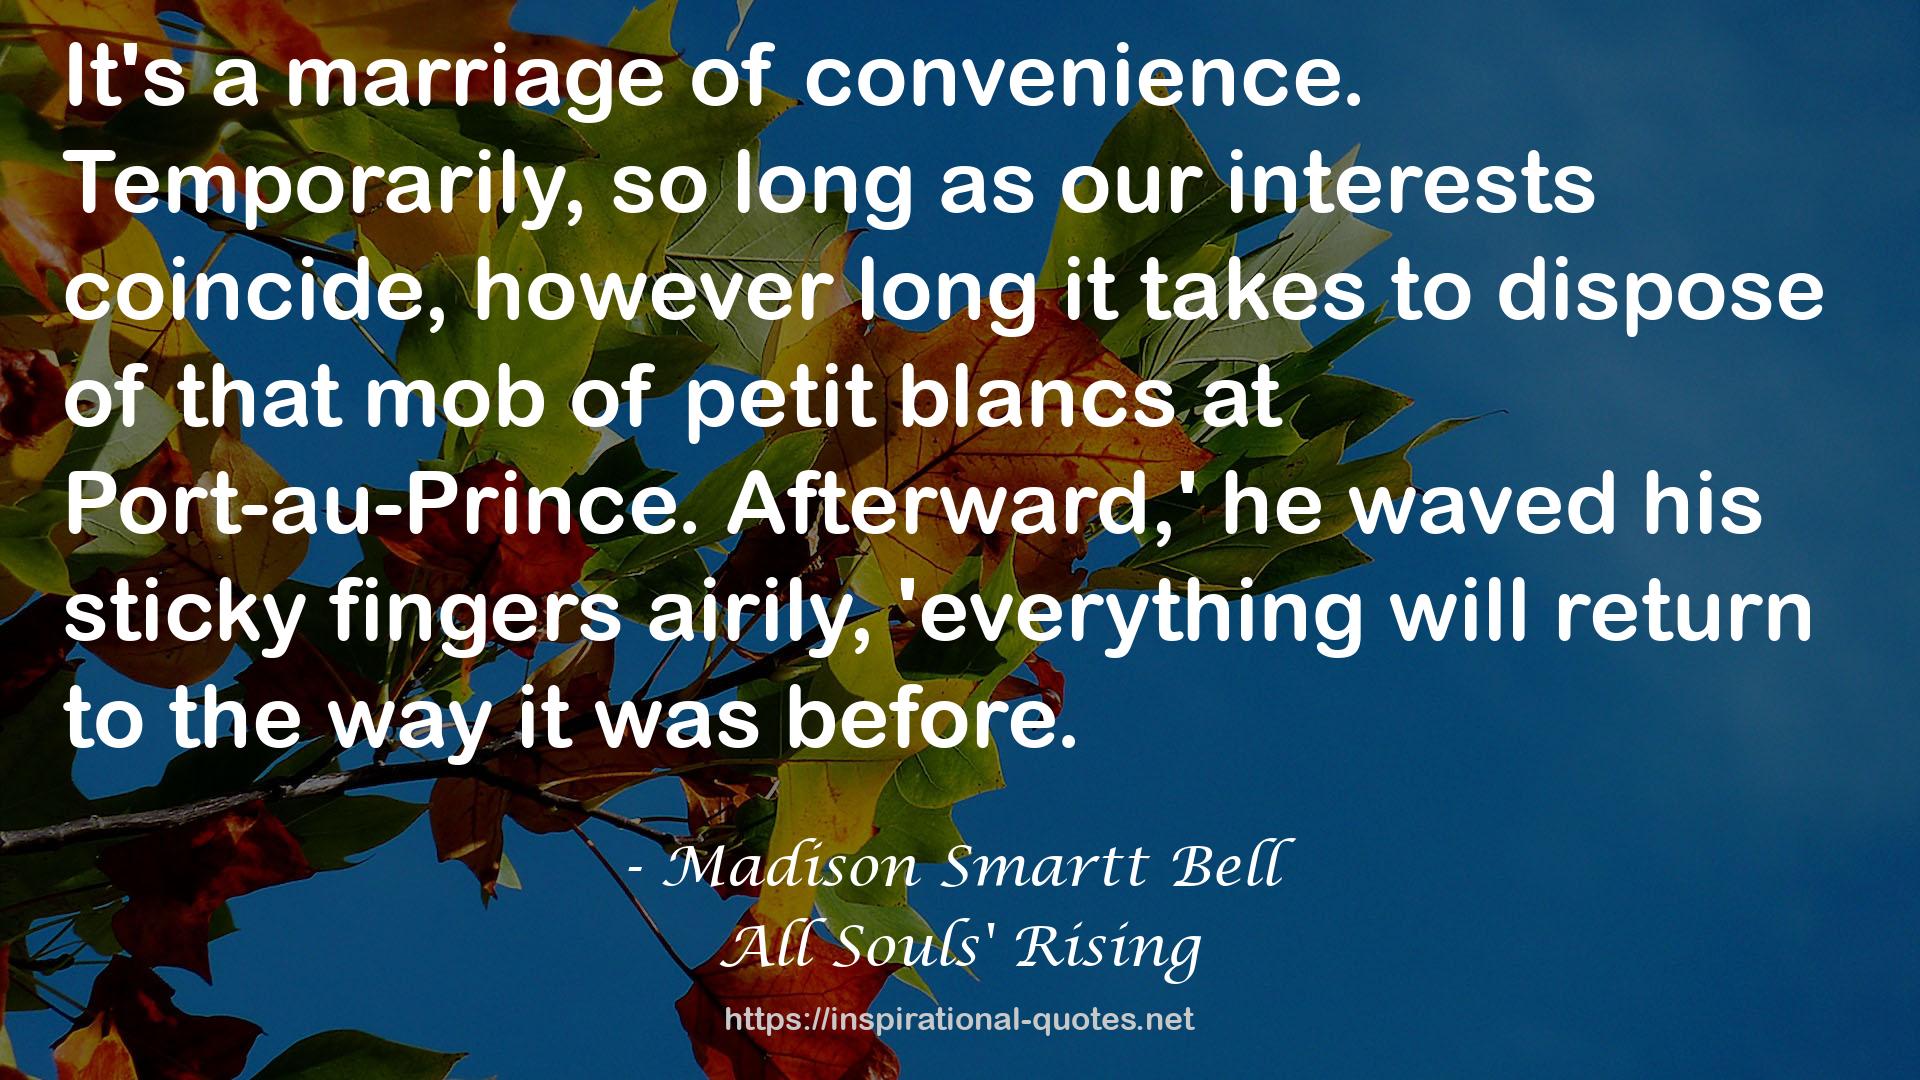 Madison Smartt Bell QUOTES